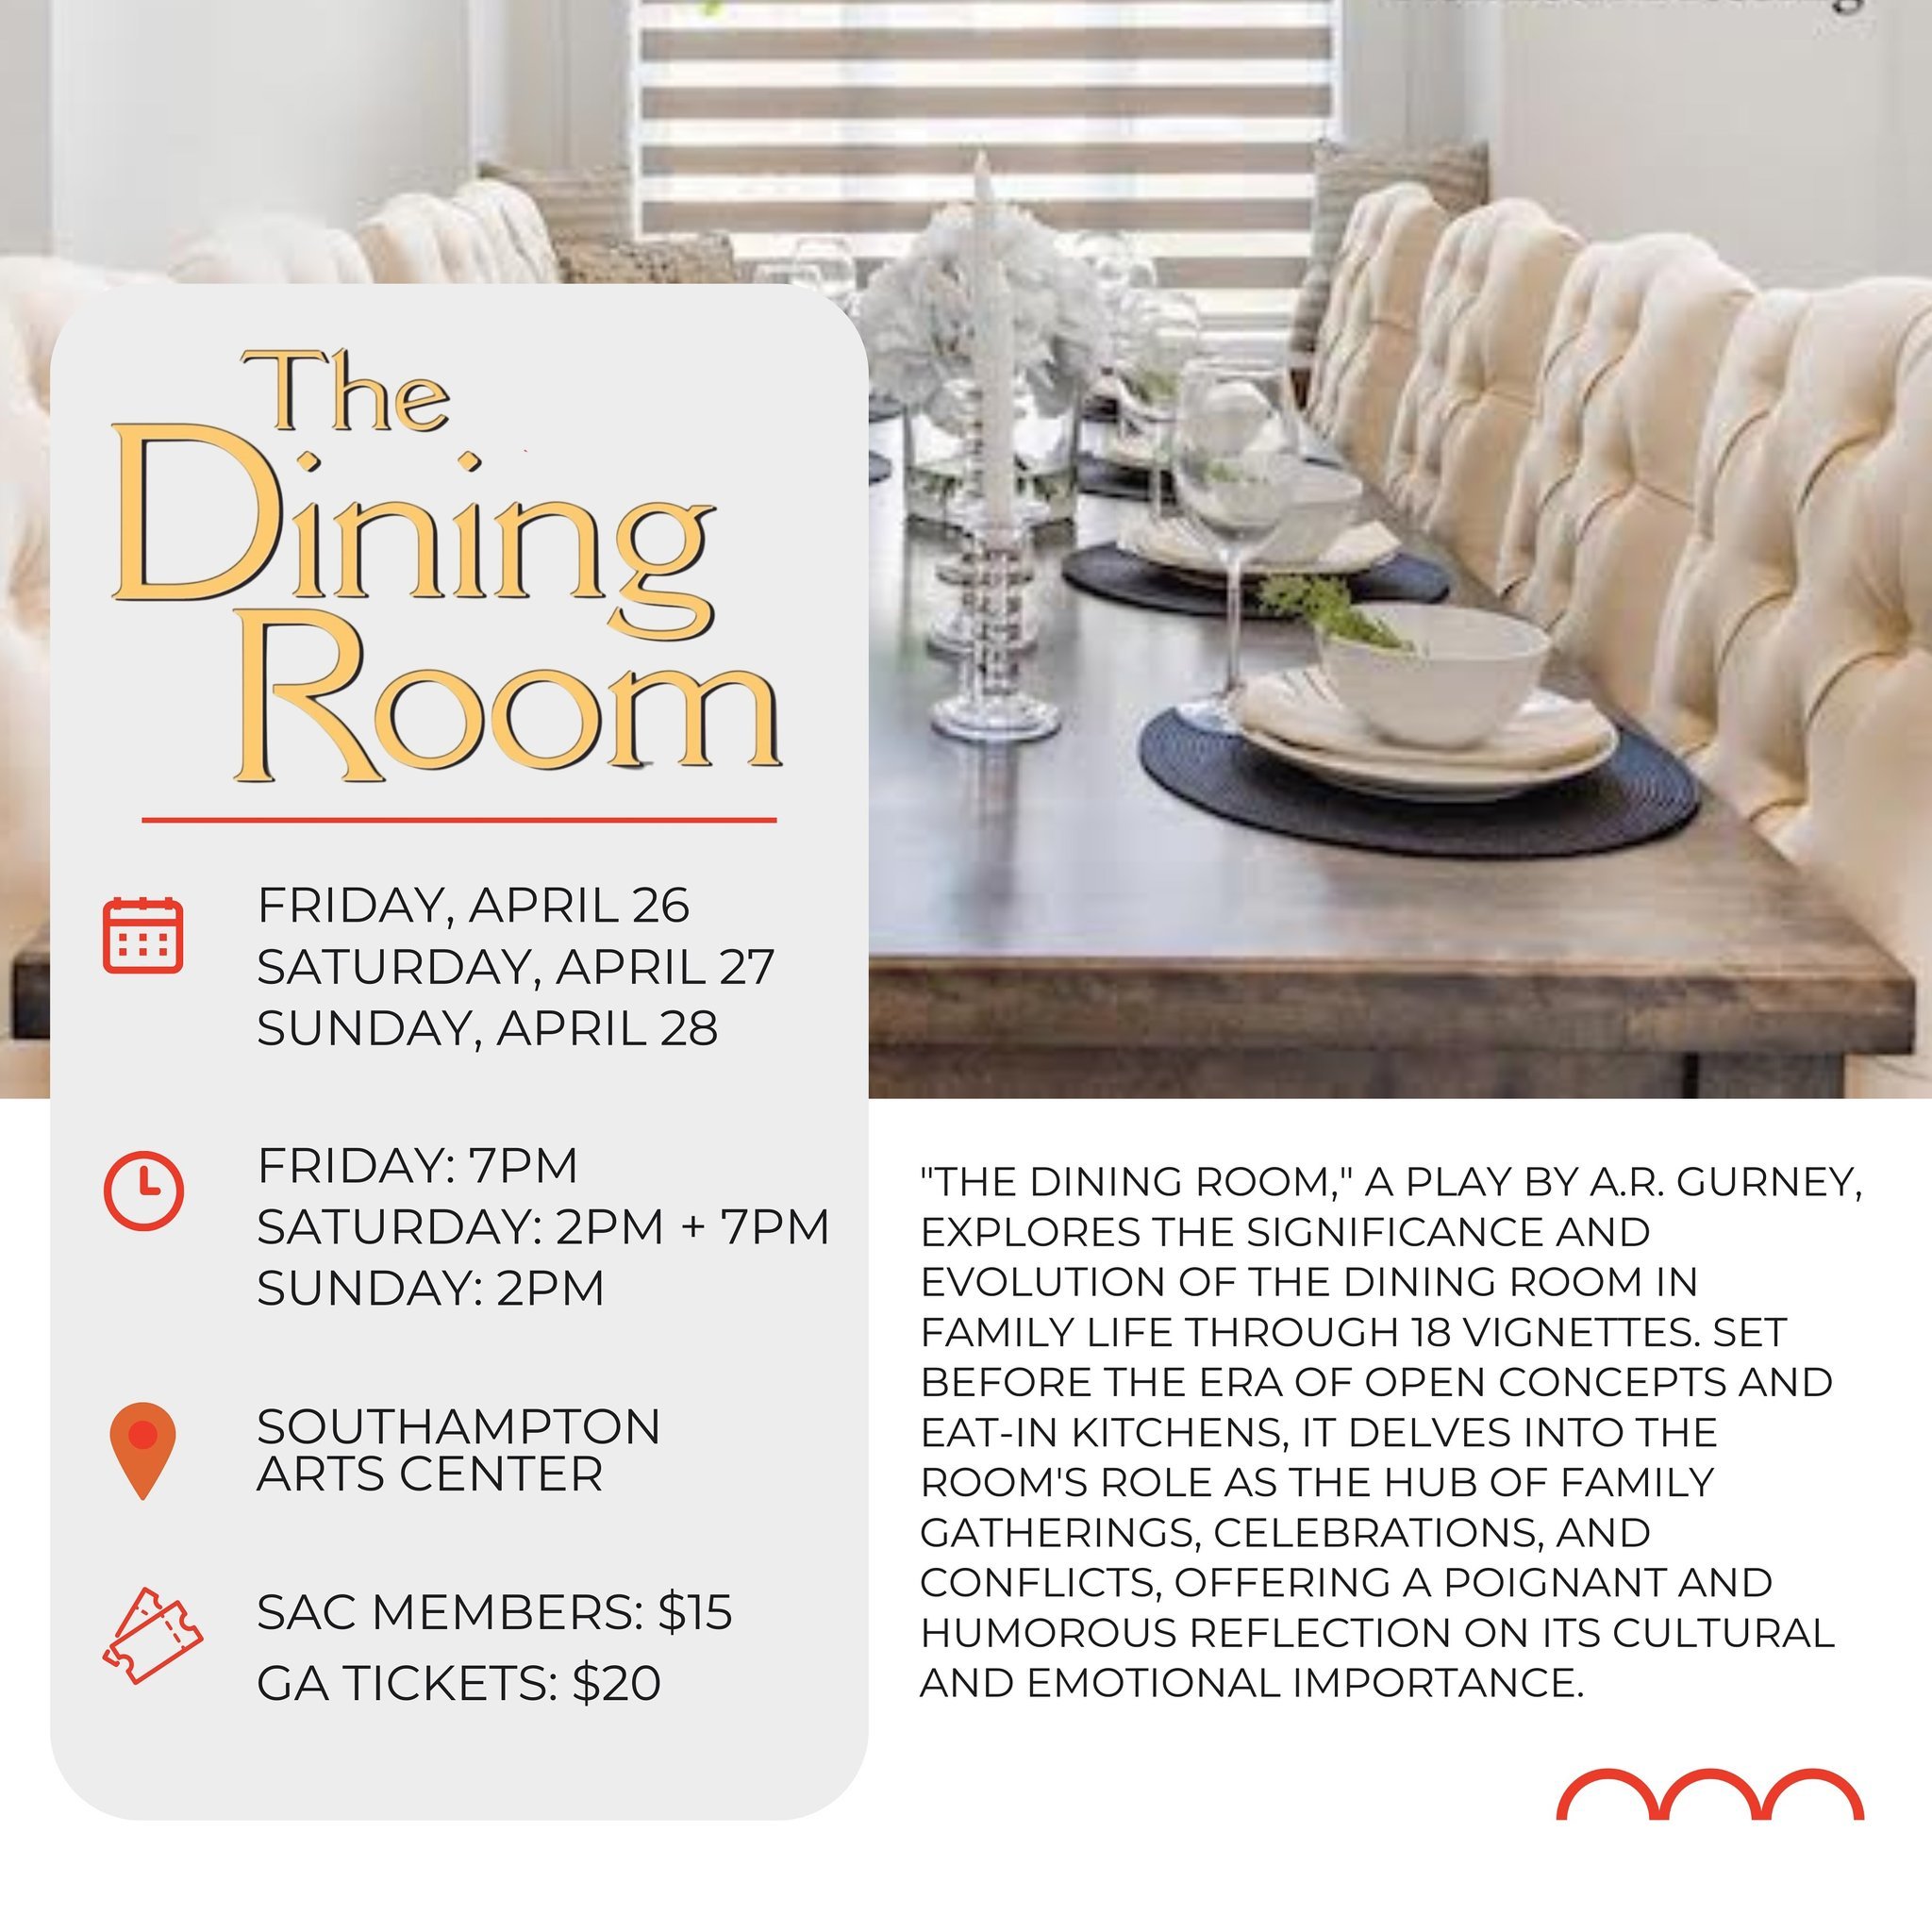 Step into the nostalgia of &lsquo;The Dining Room&rsquo; 

Join us April 26-28 at Southampton Arts Center for an exploration of the heart of every home. A.R. Gurney&rsquo;s 18 vignettes promise humor, poignancy, and reflection as we revisit the cheri